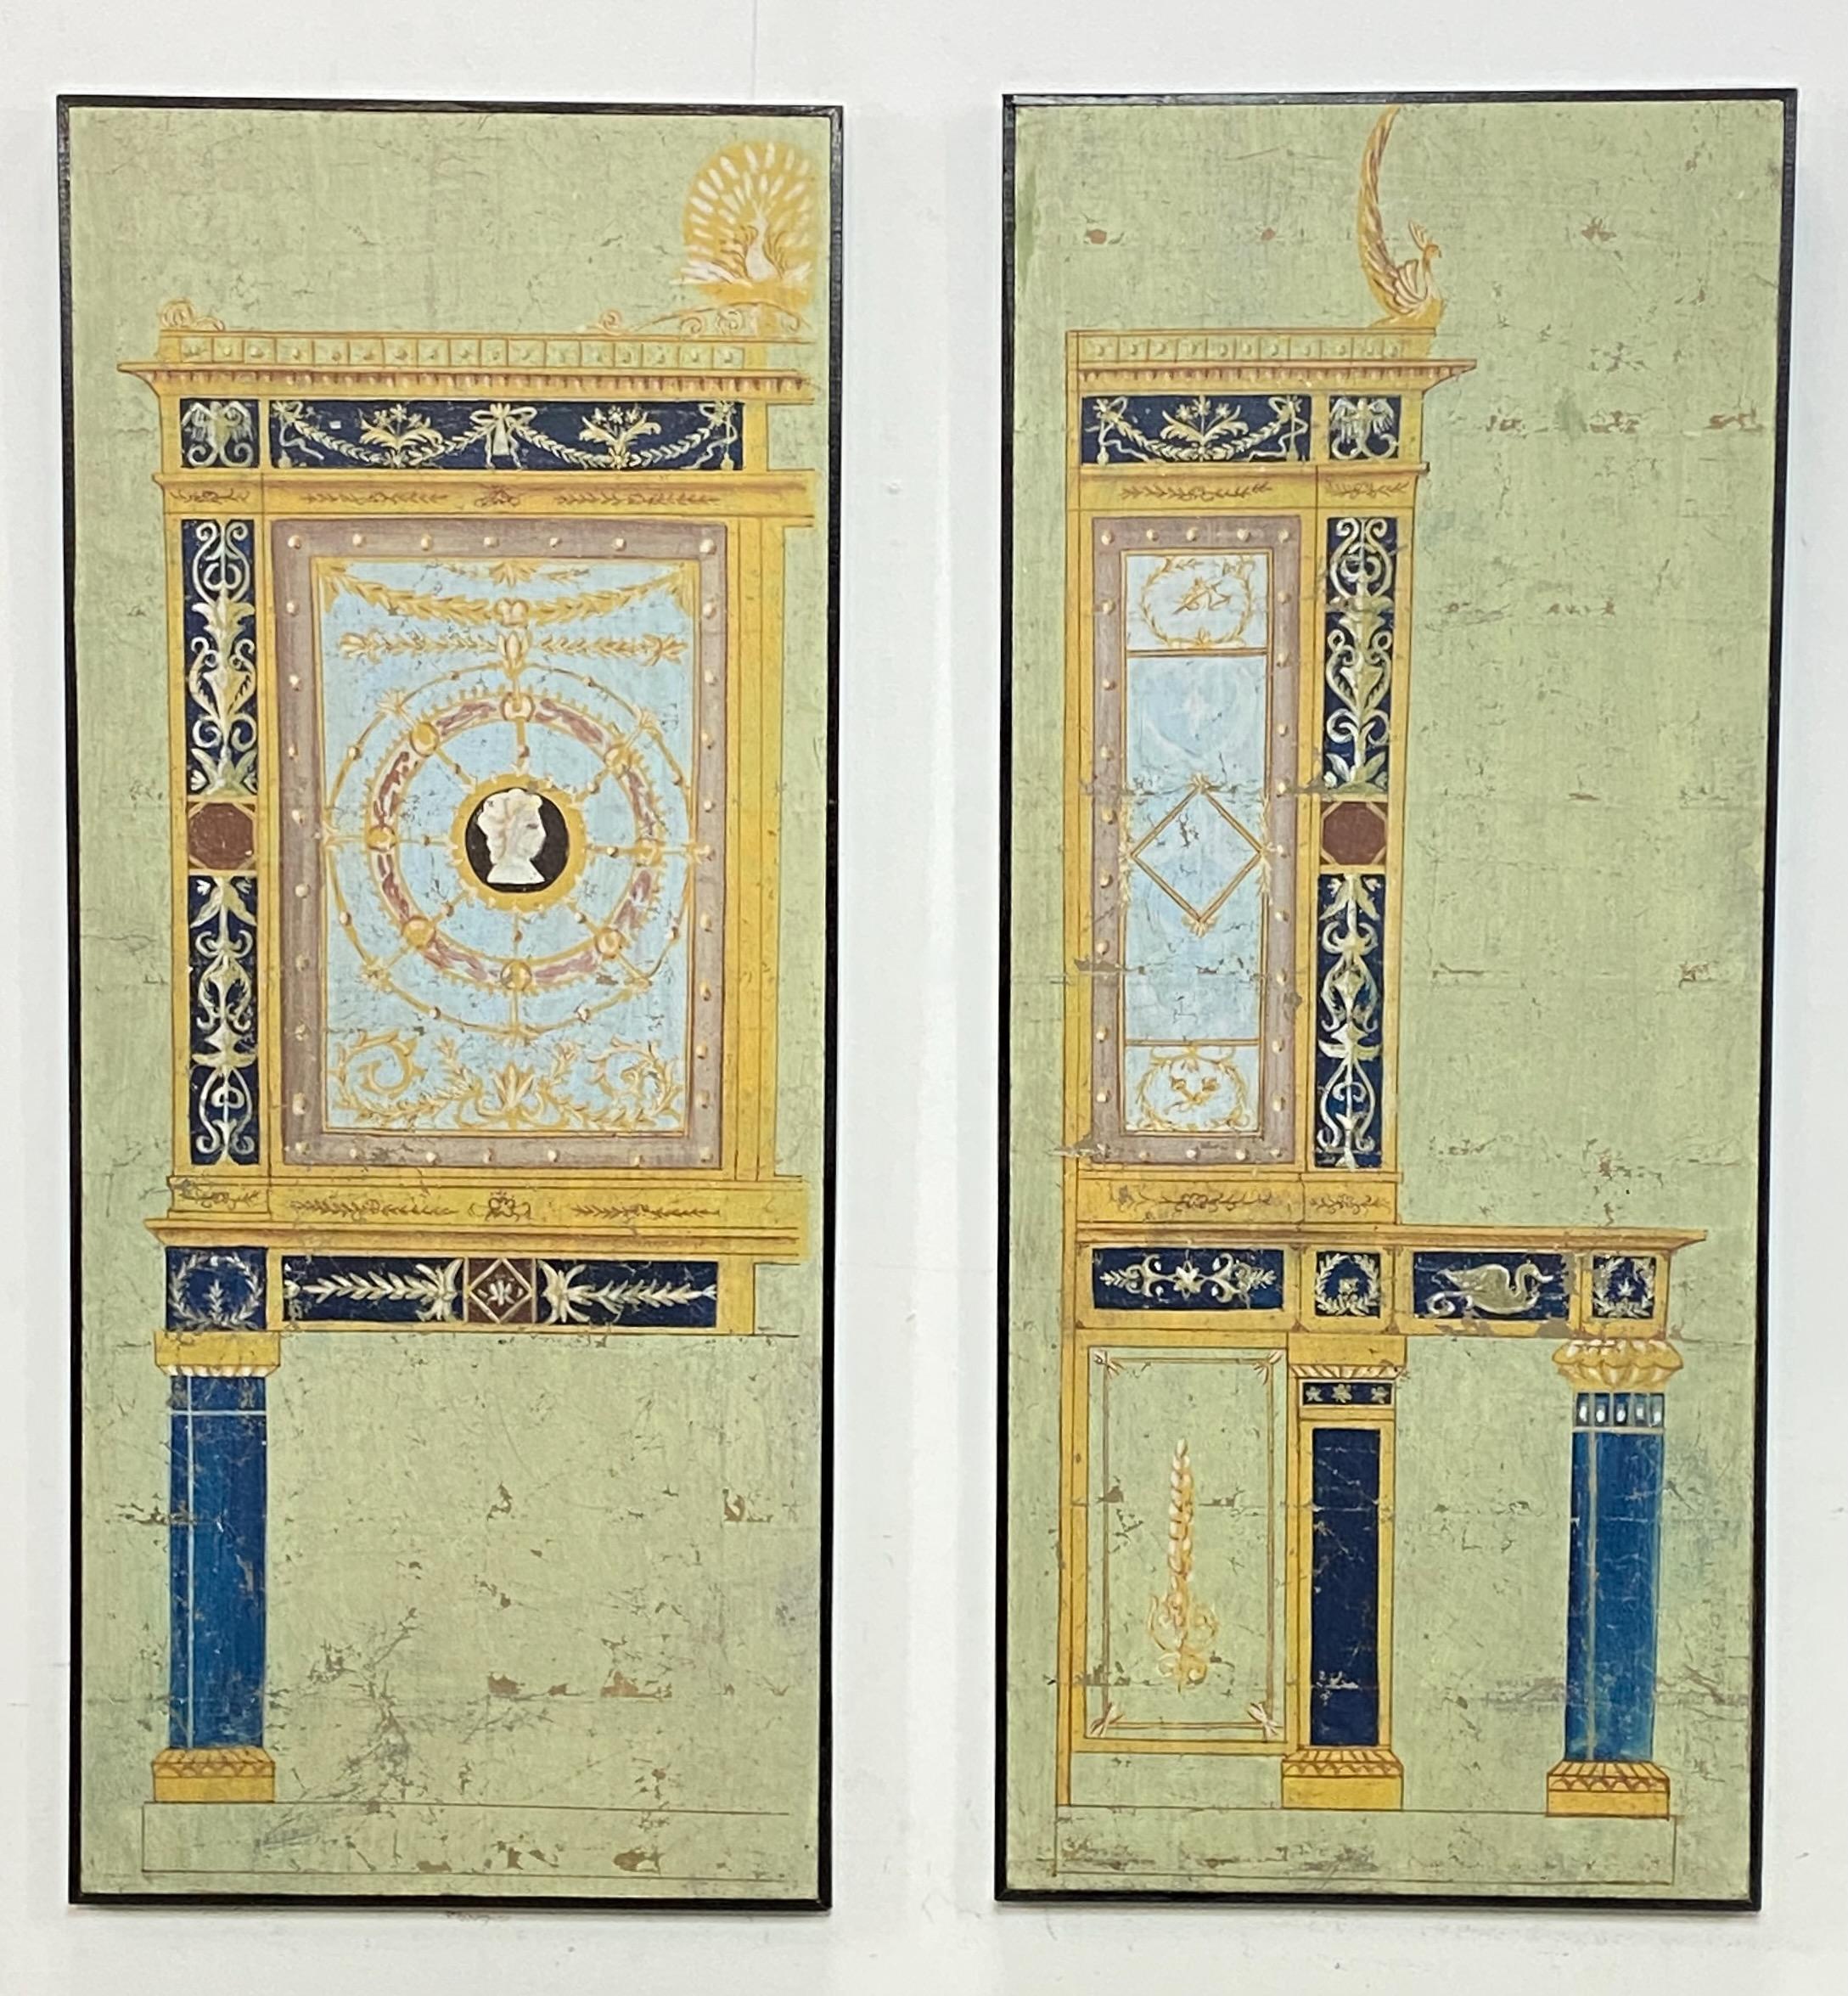 A pair of hand painted gouache (colored chalk based) water color on paper, in the Imperial period style from Pompeii Italy. 
They are likely part of a late 18th or early 19th century decorative screen or wall mural. 
In very good antique condition